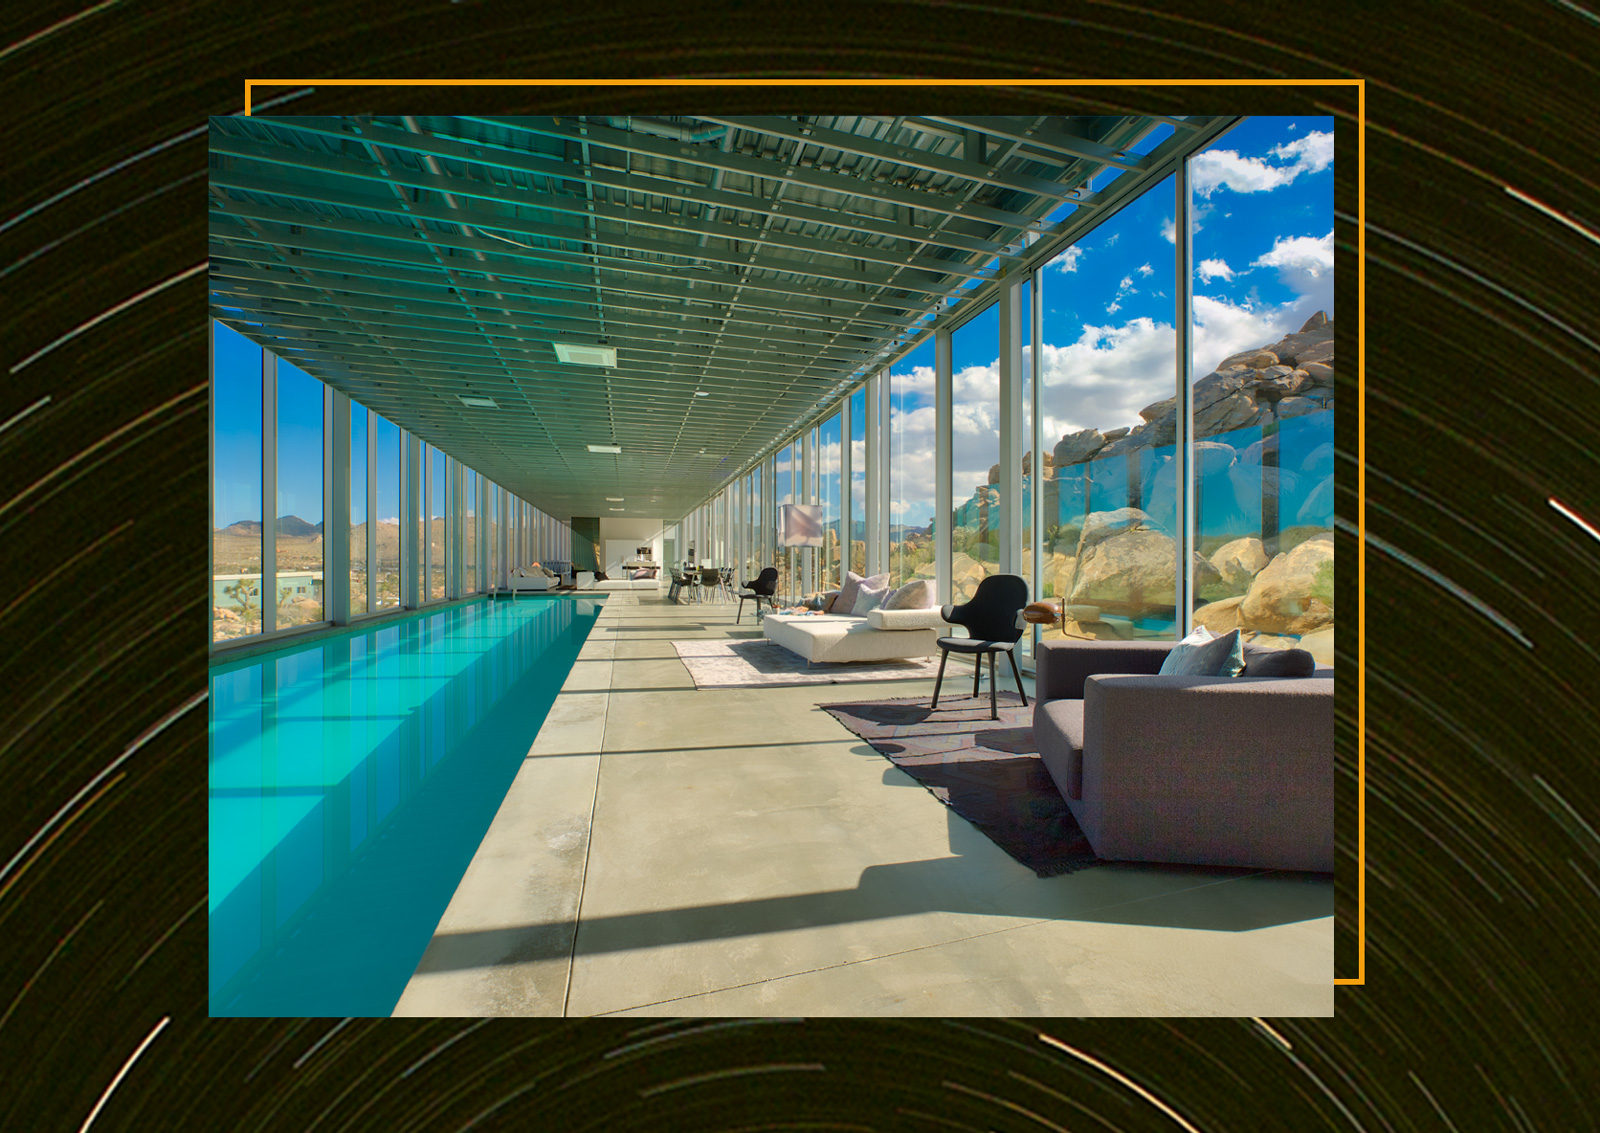 Why Joshua Tree’s $18M House Remains “Invisible” to Buyers